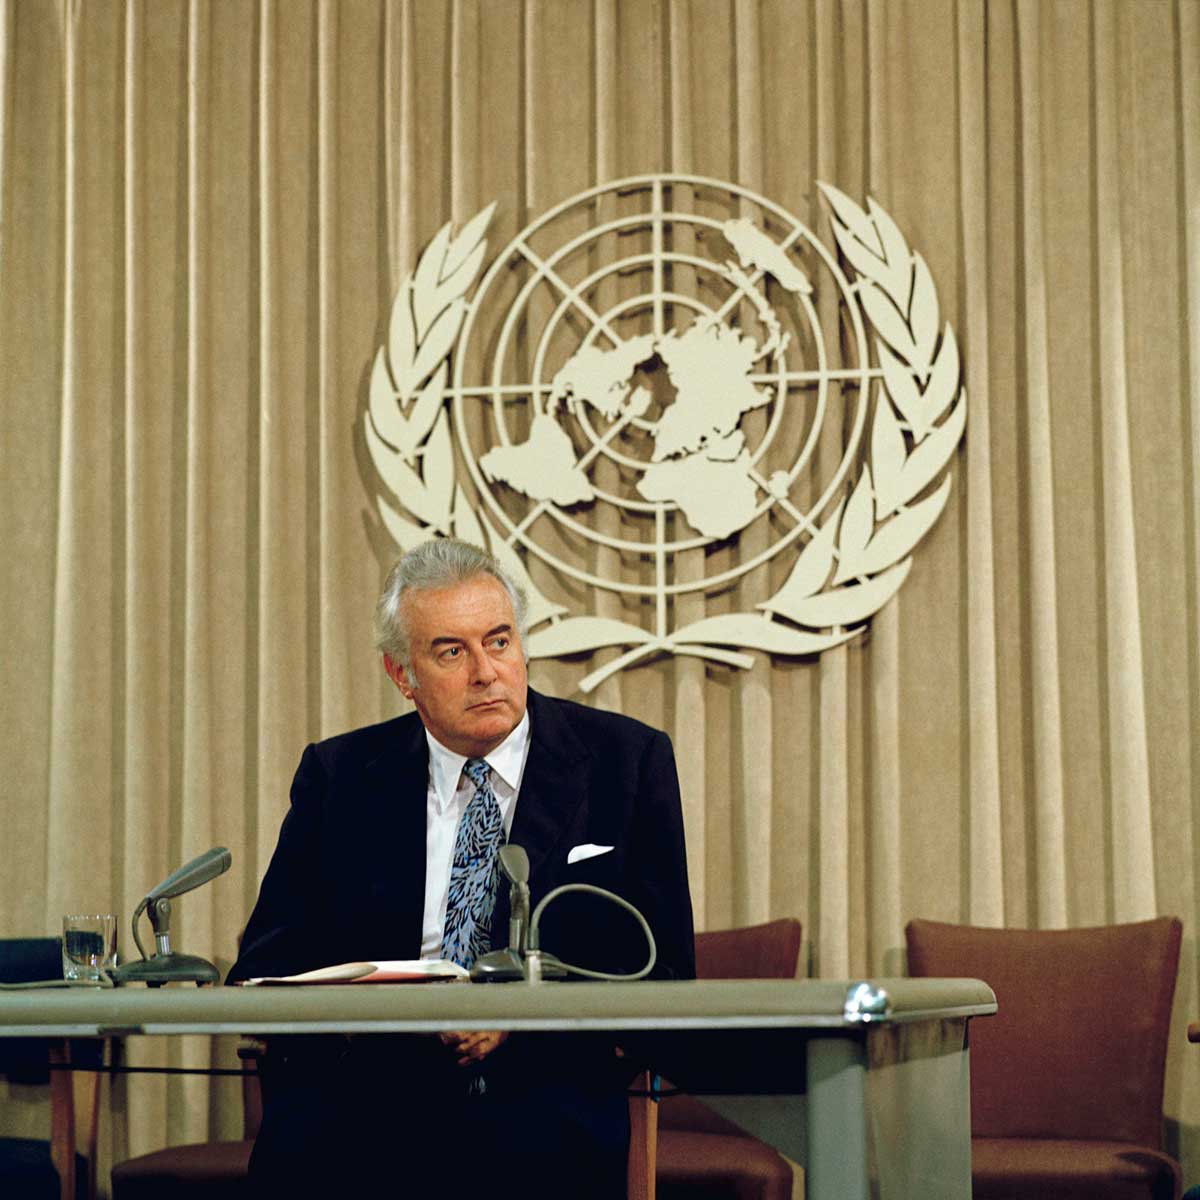 Colour photo of middle-aged man in suit sitting behind desk with UN symbol in background. - click to view larger image